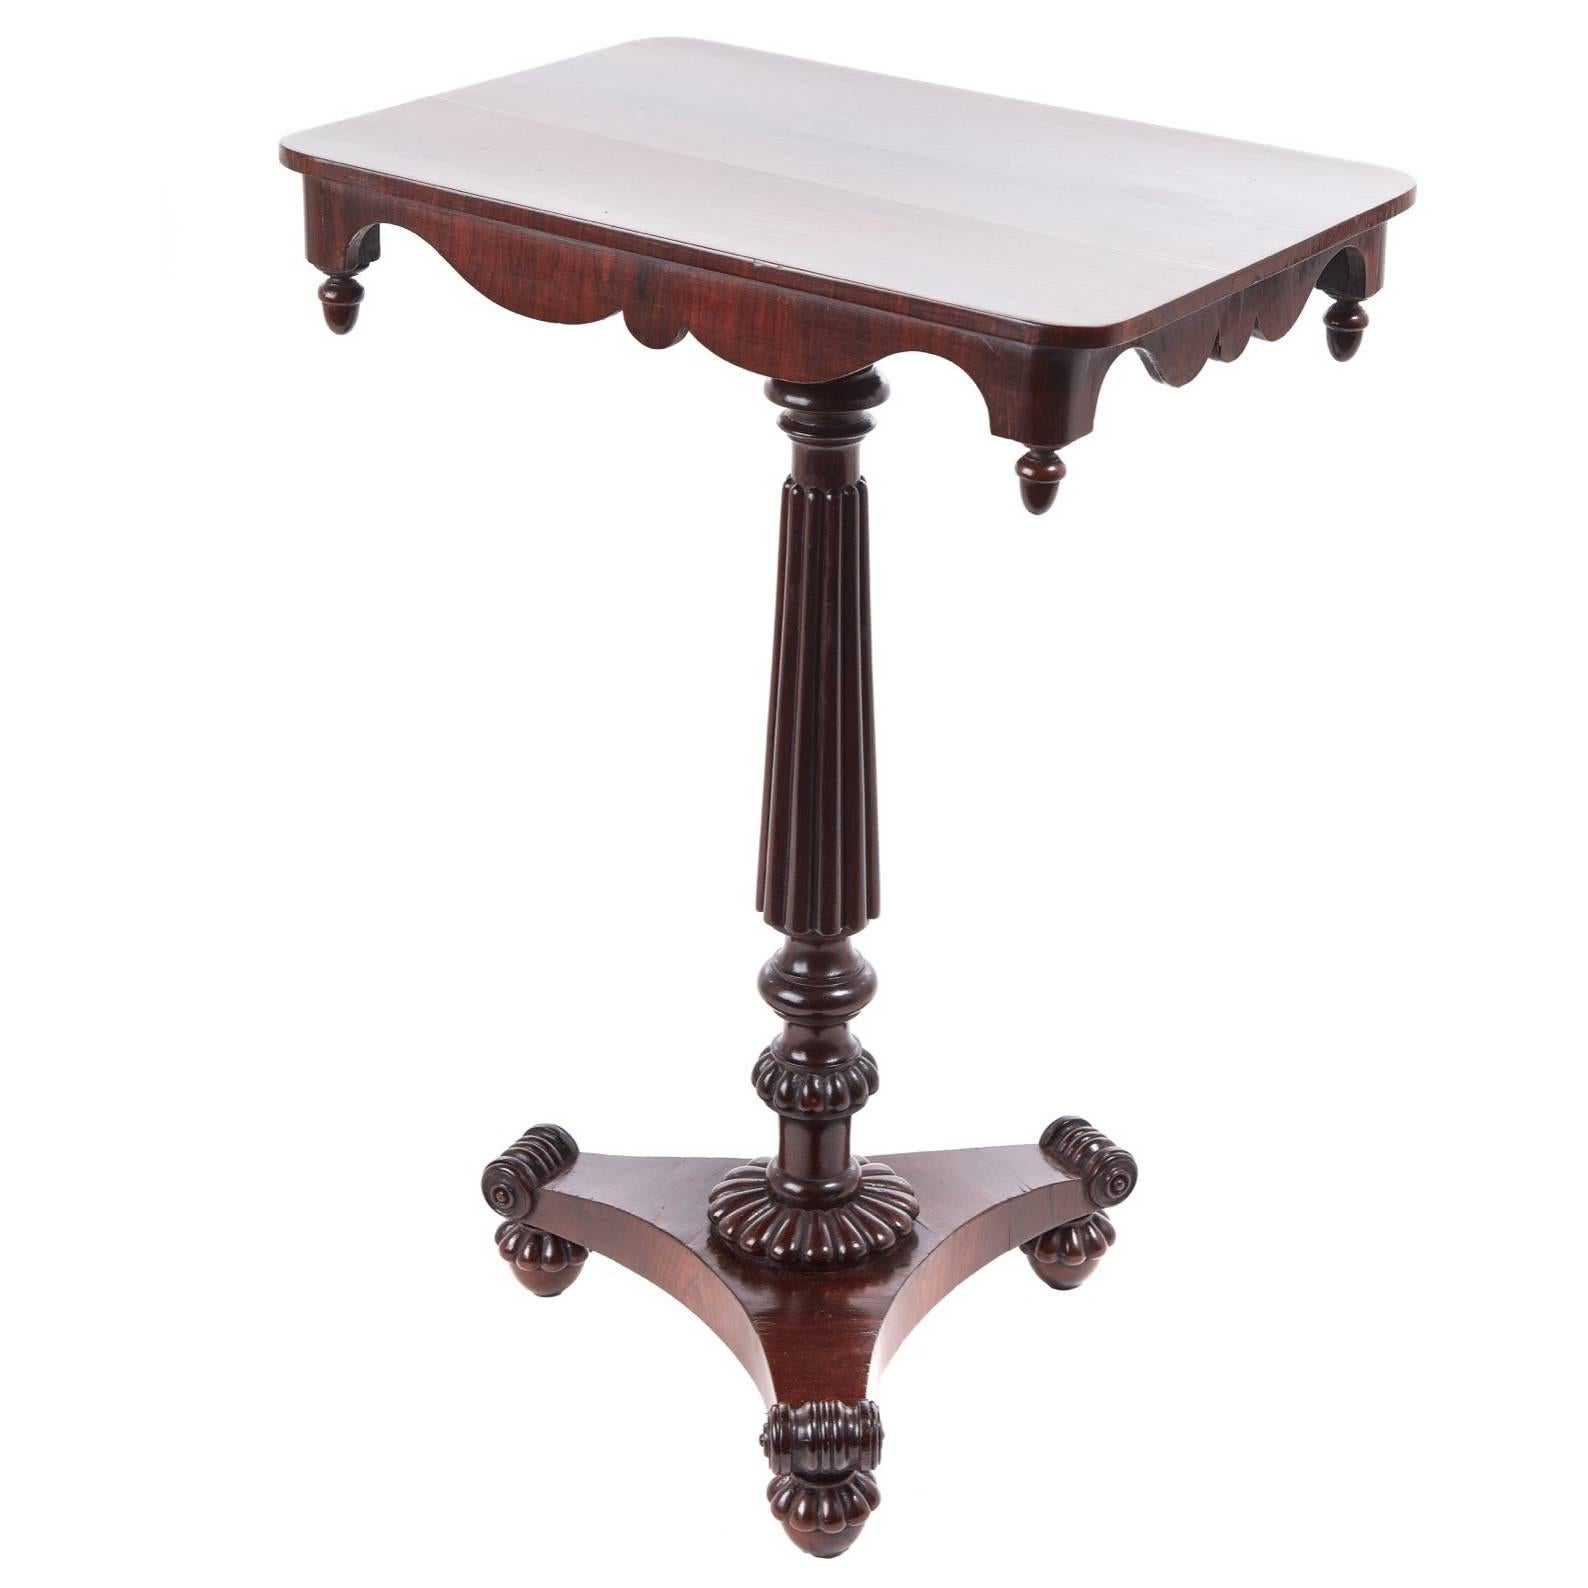 Quality William iv Rosewood Wine/Lamp Table For Sale